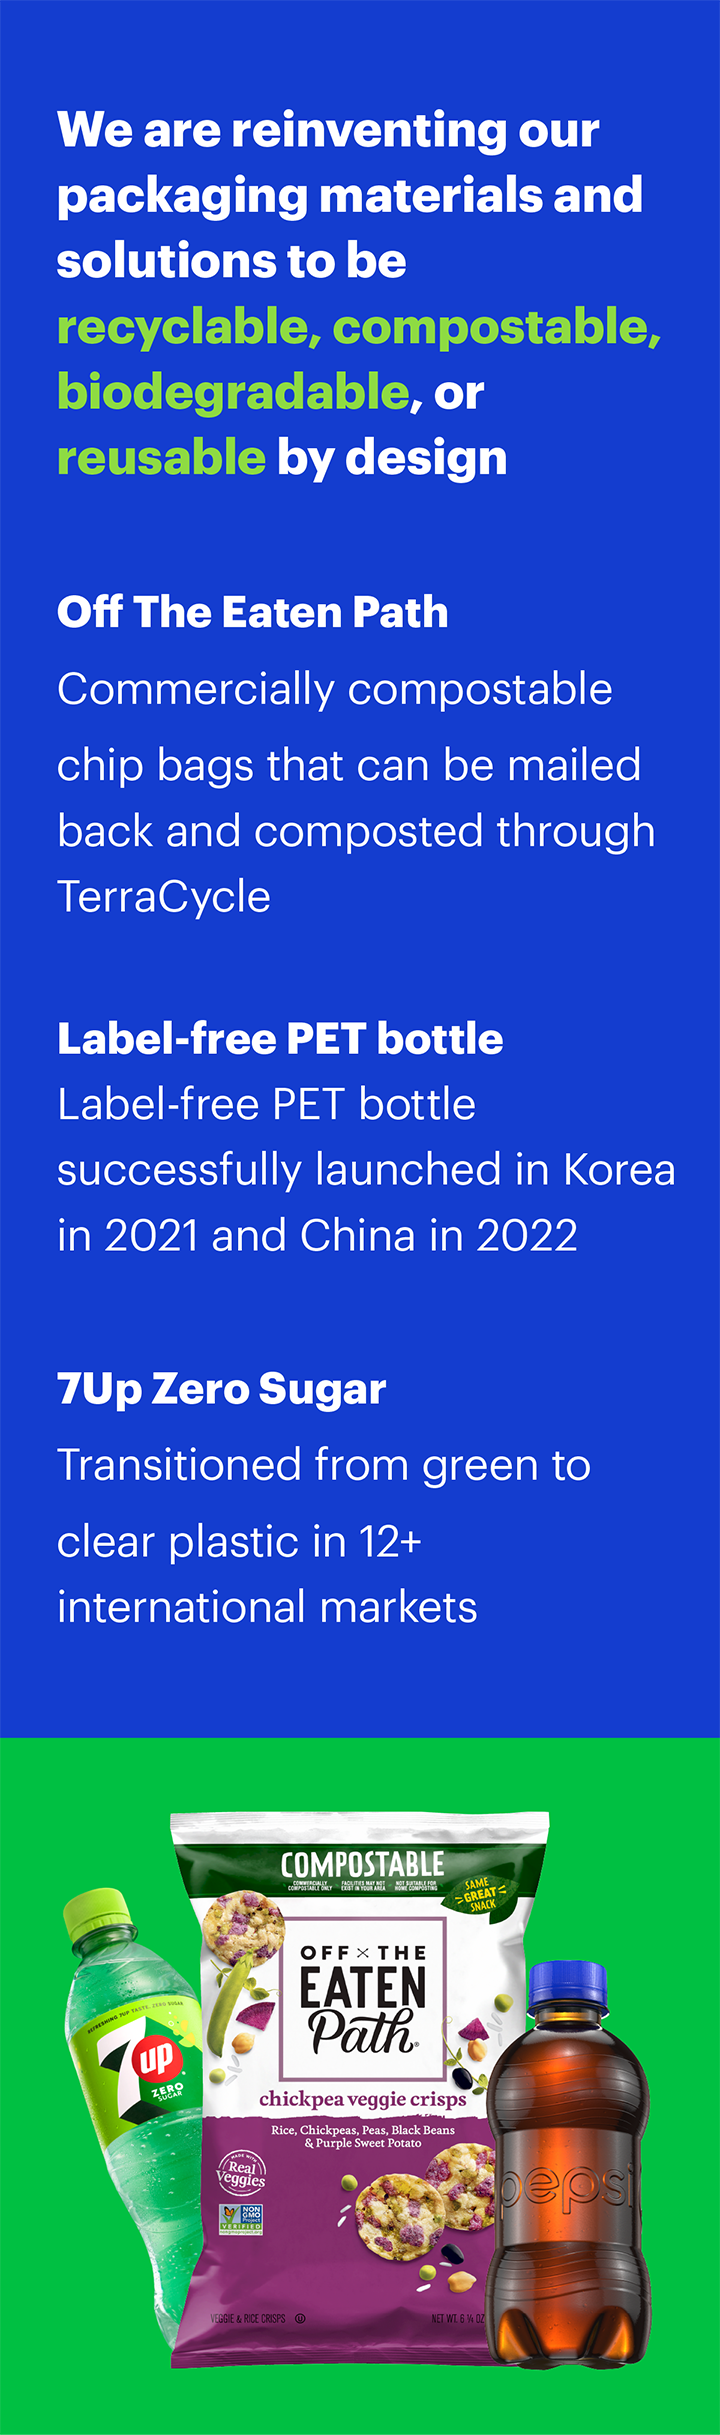 Graphic showing select PepsiCo packaging innovations